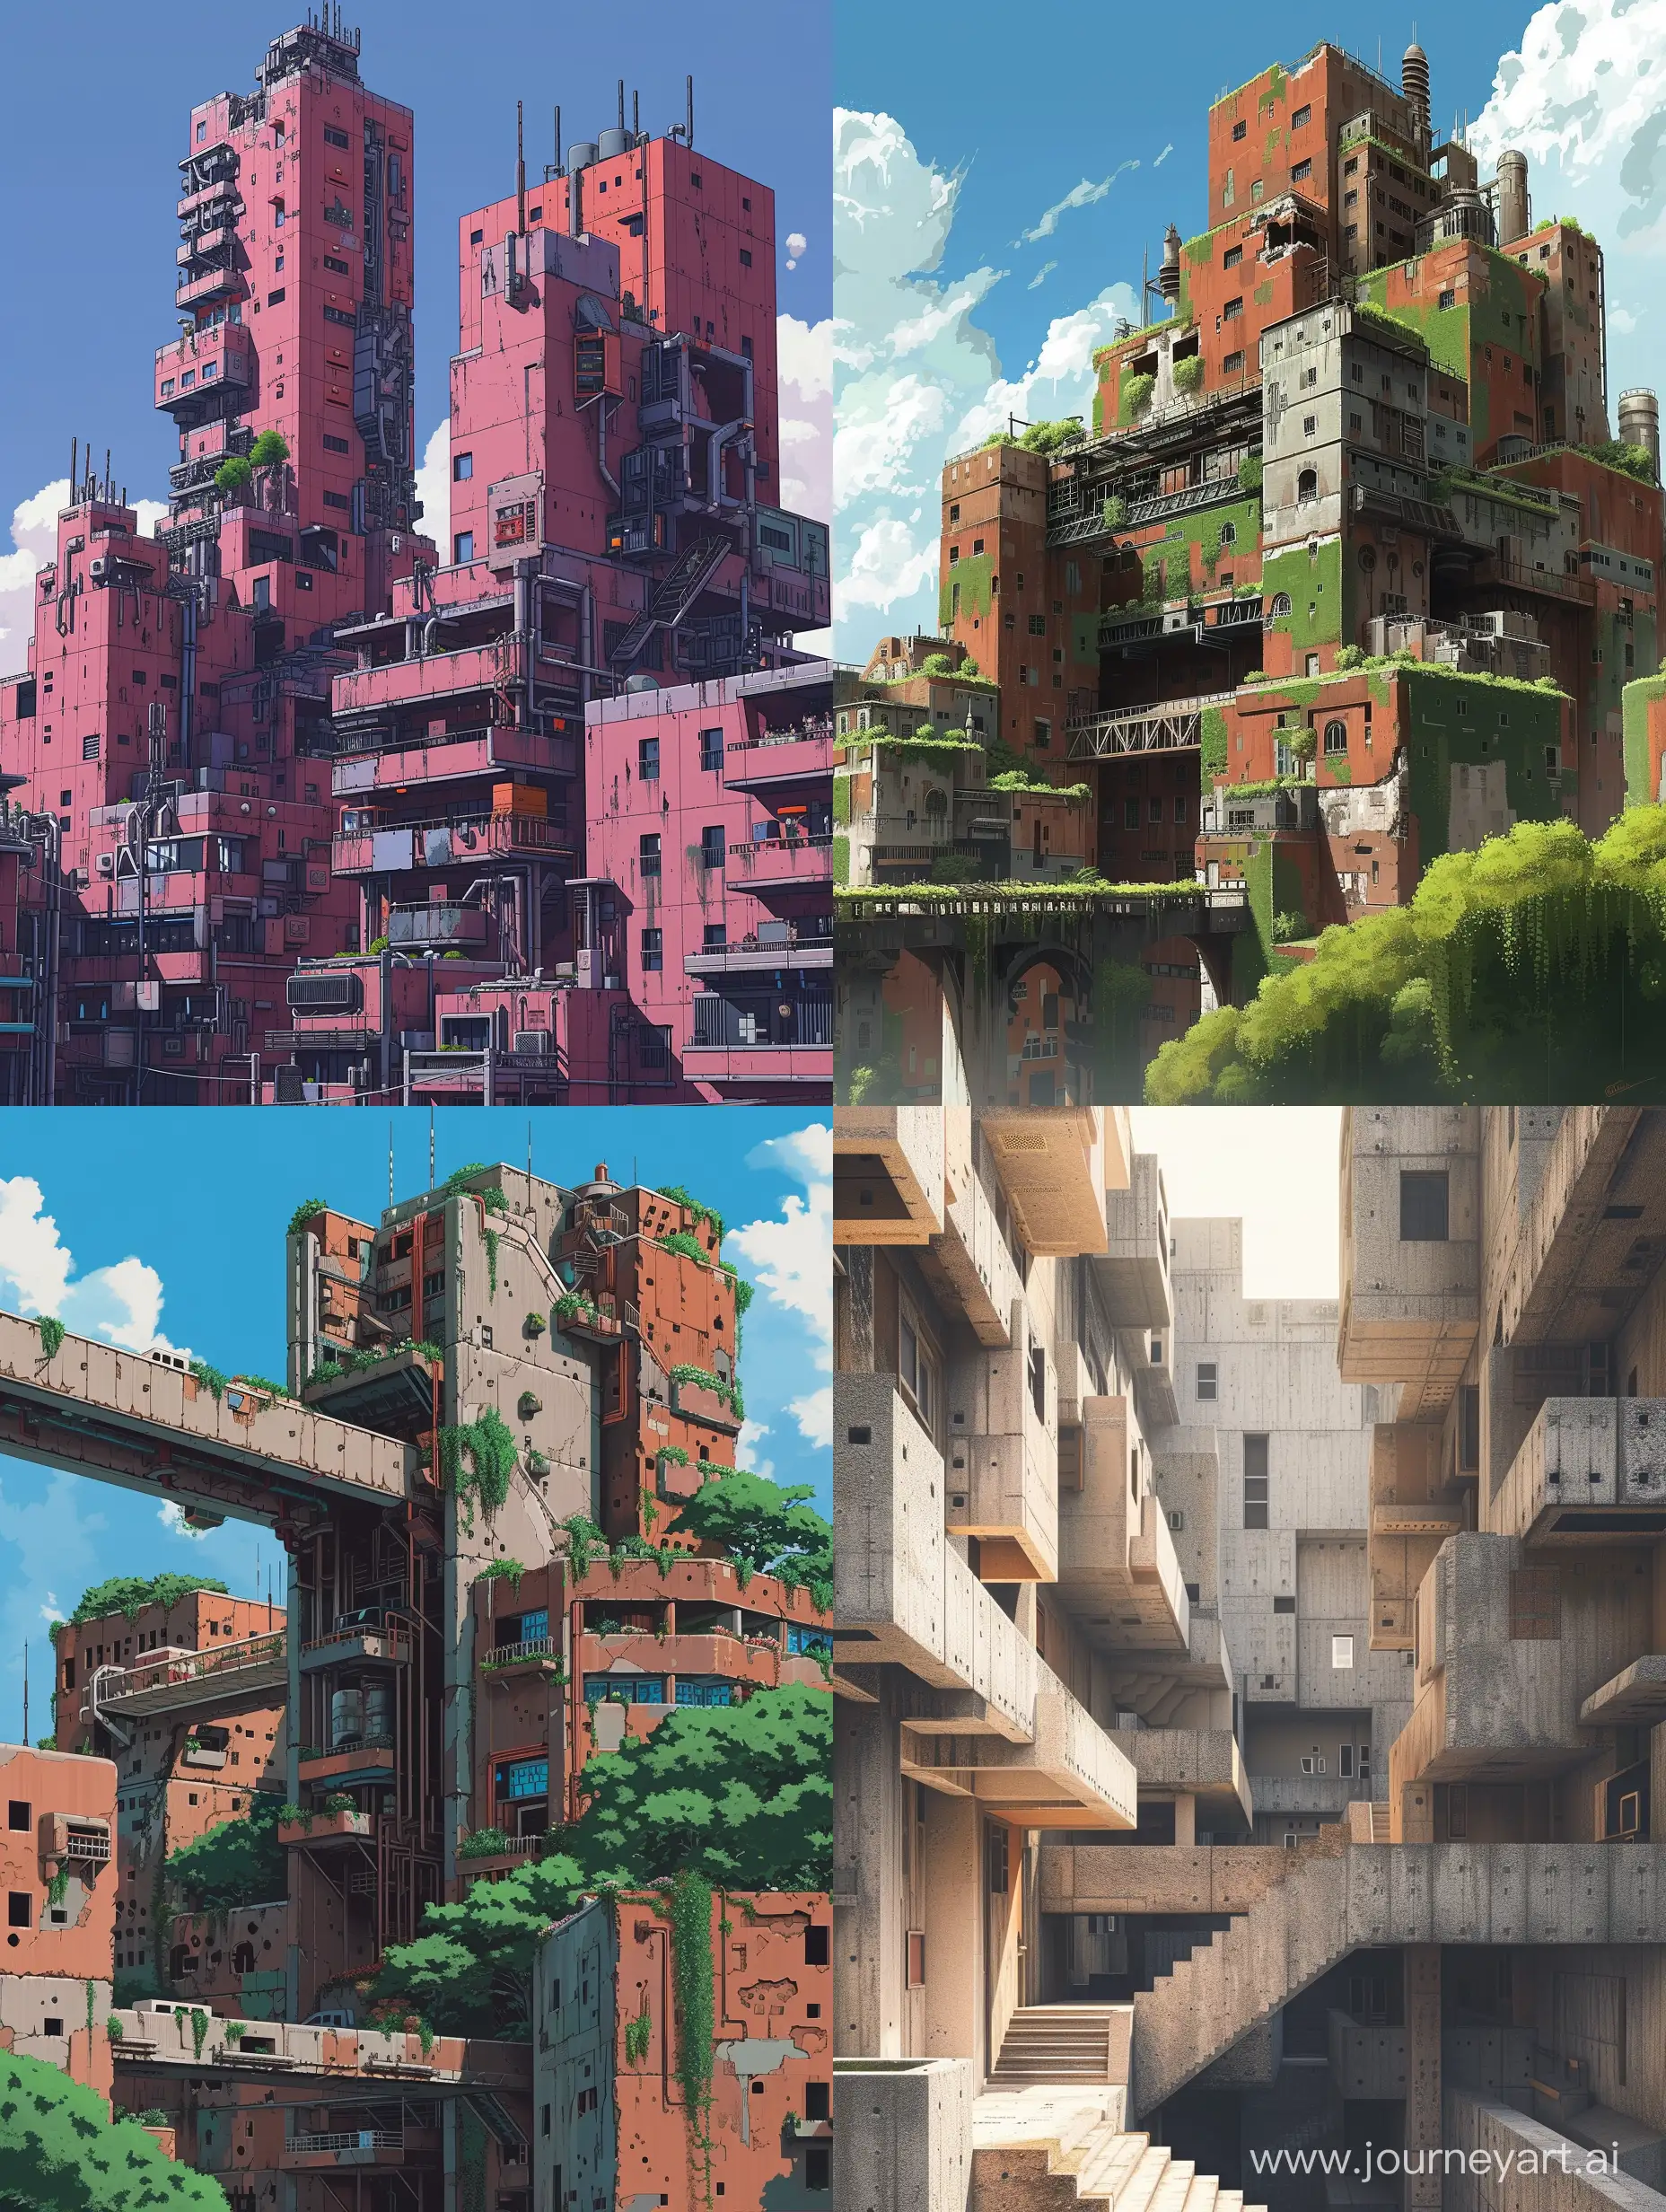 A picture of Brutalism Minecraft by Studio Ghibli Art Style